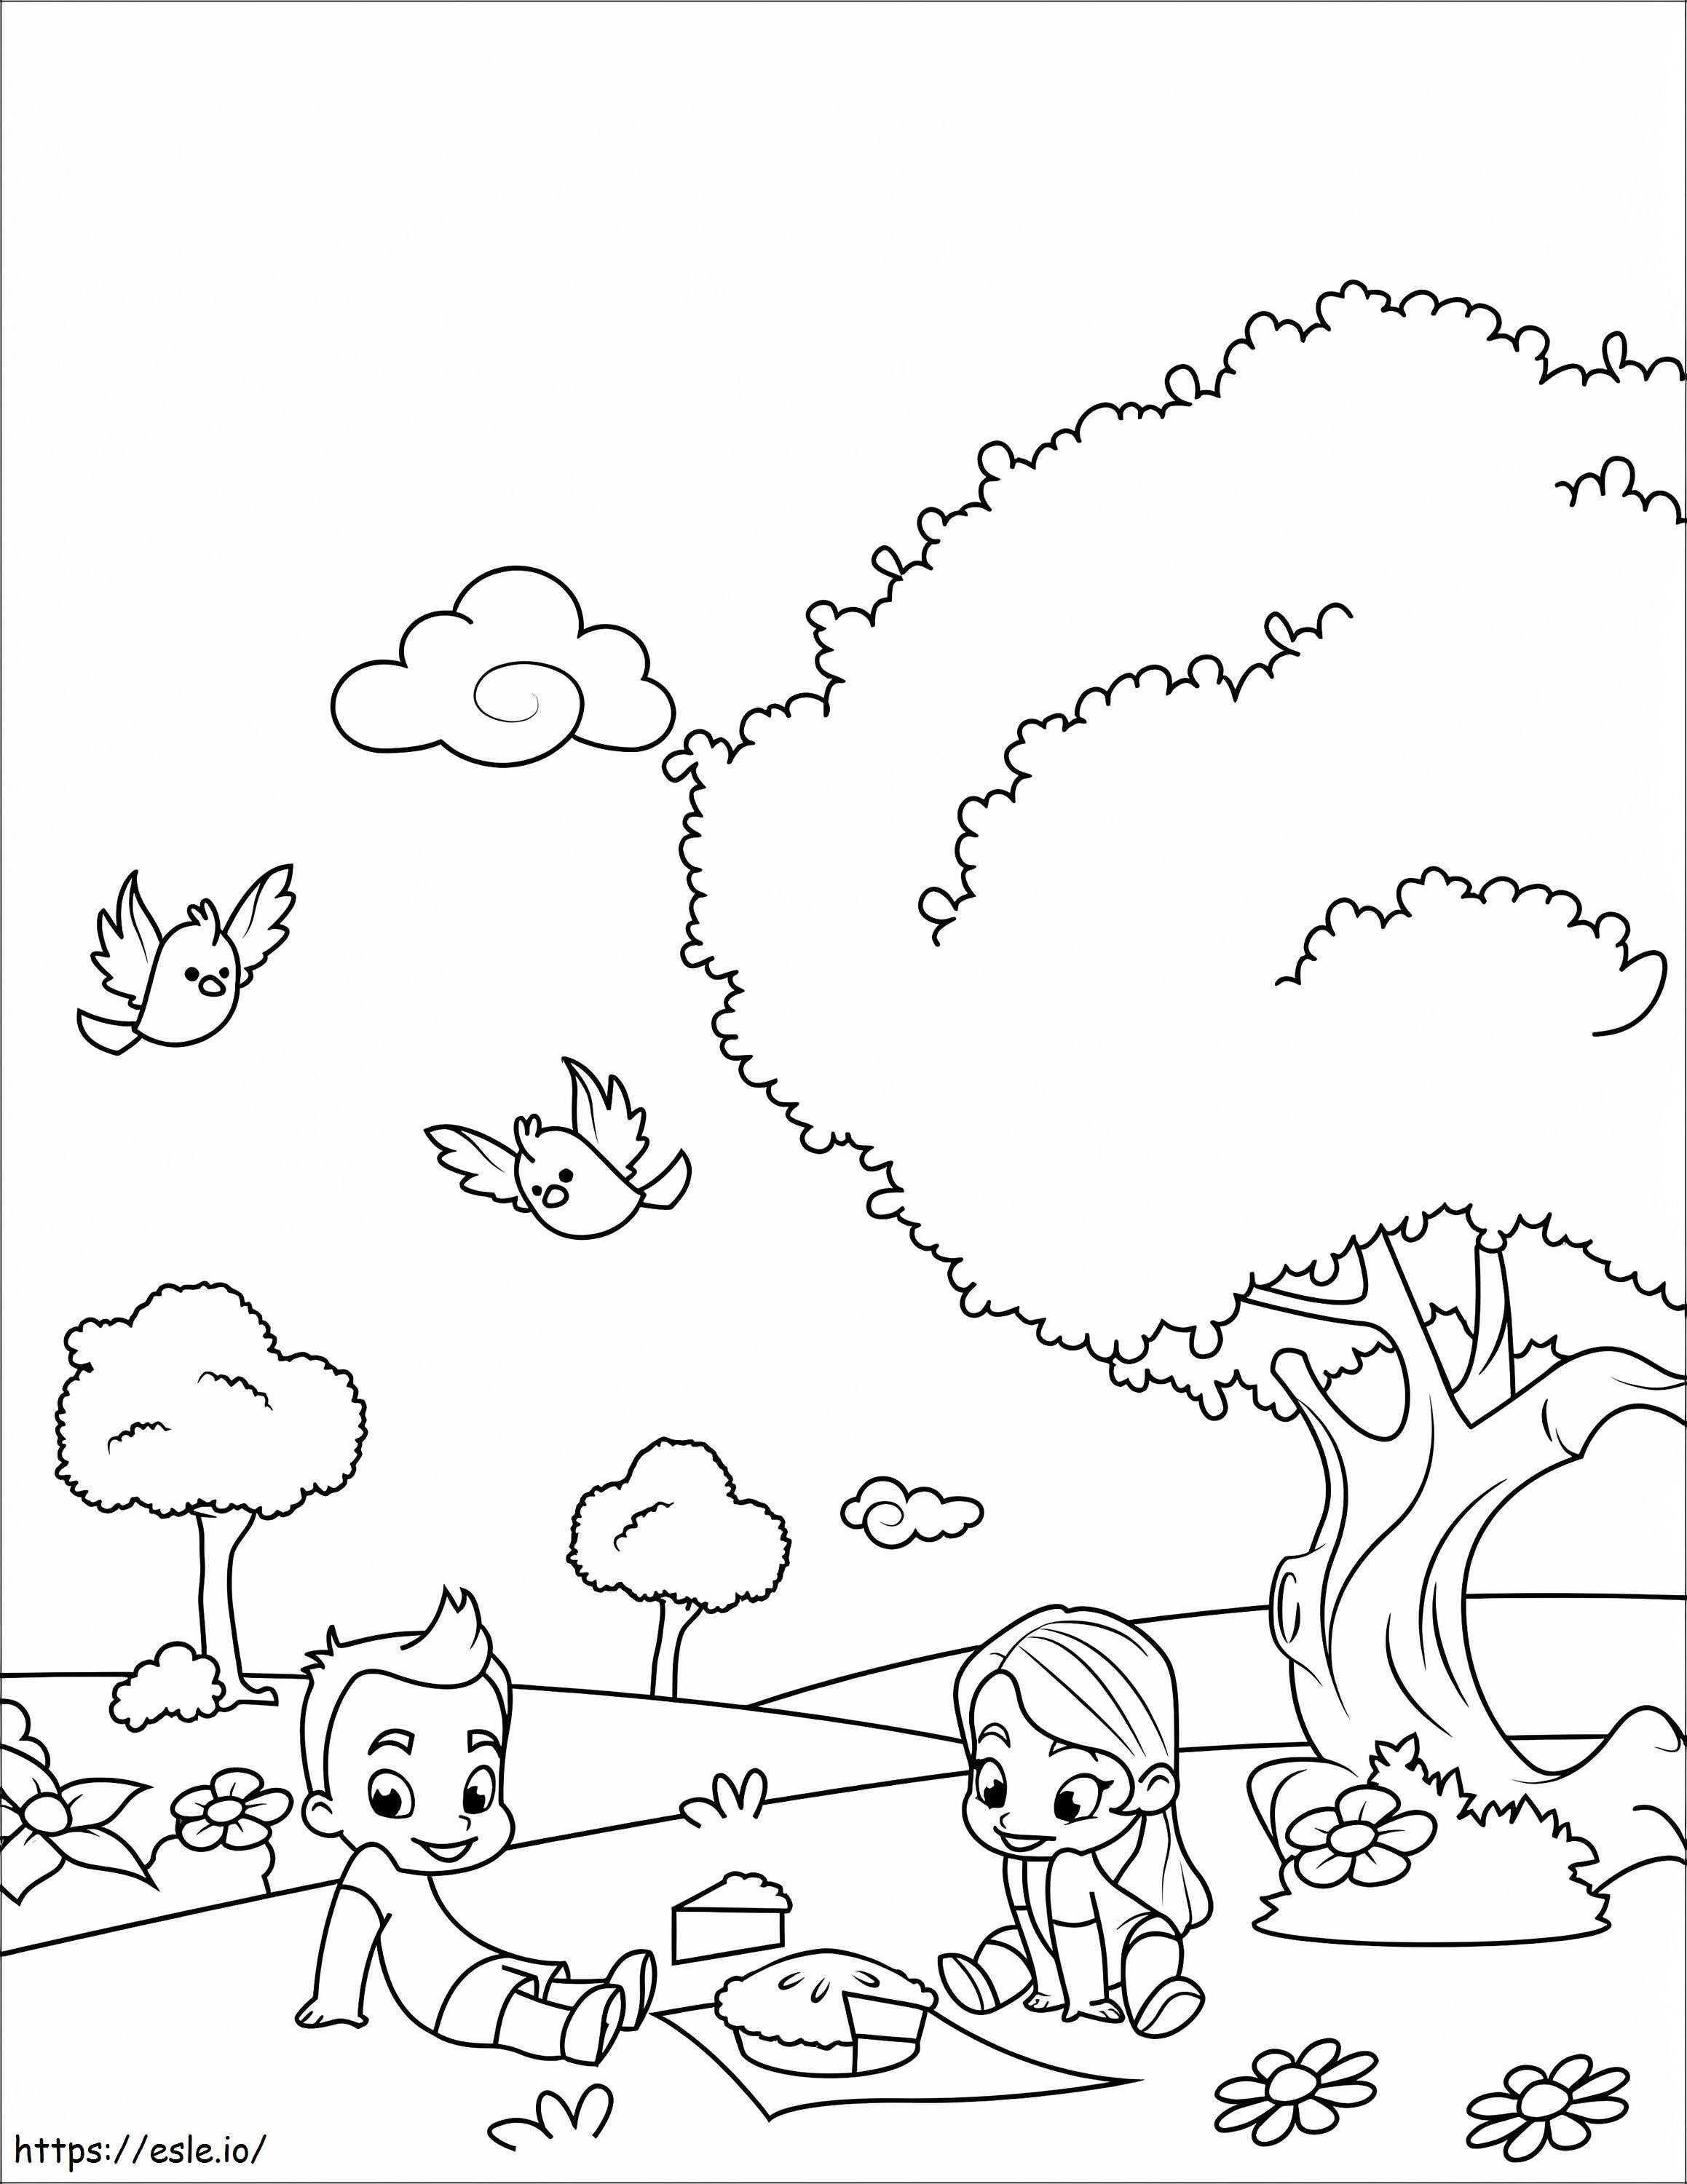 Spring Scene 2 coloring page